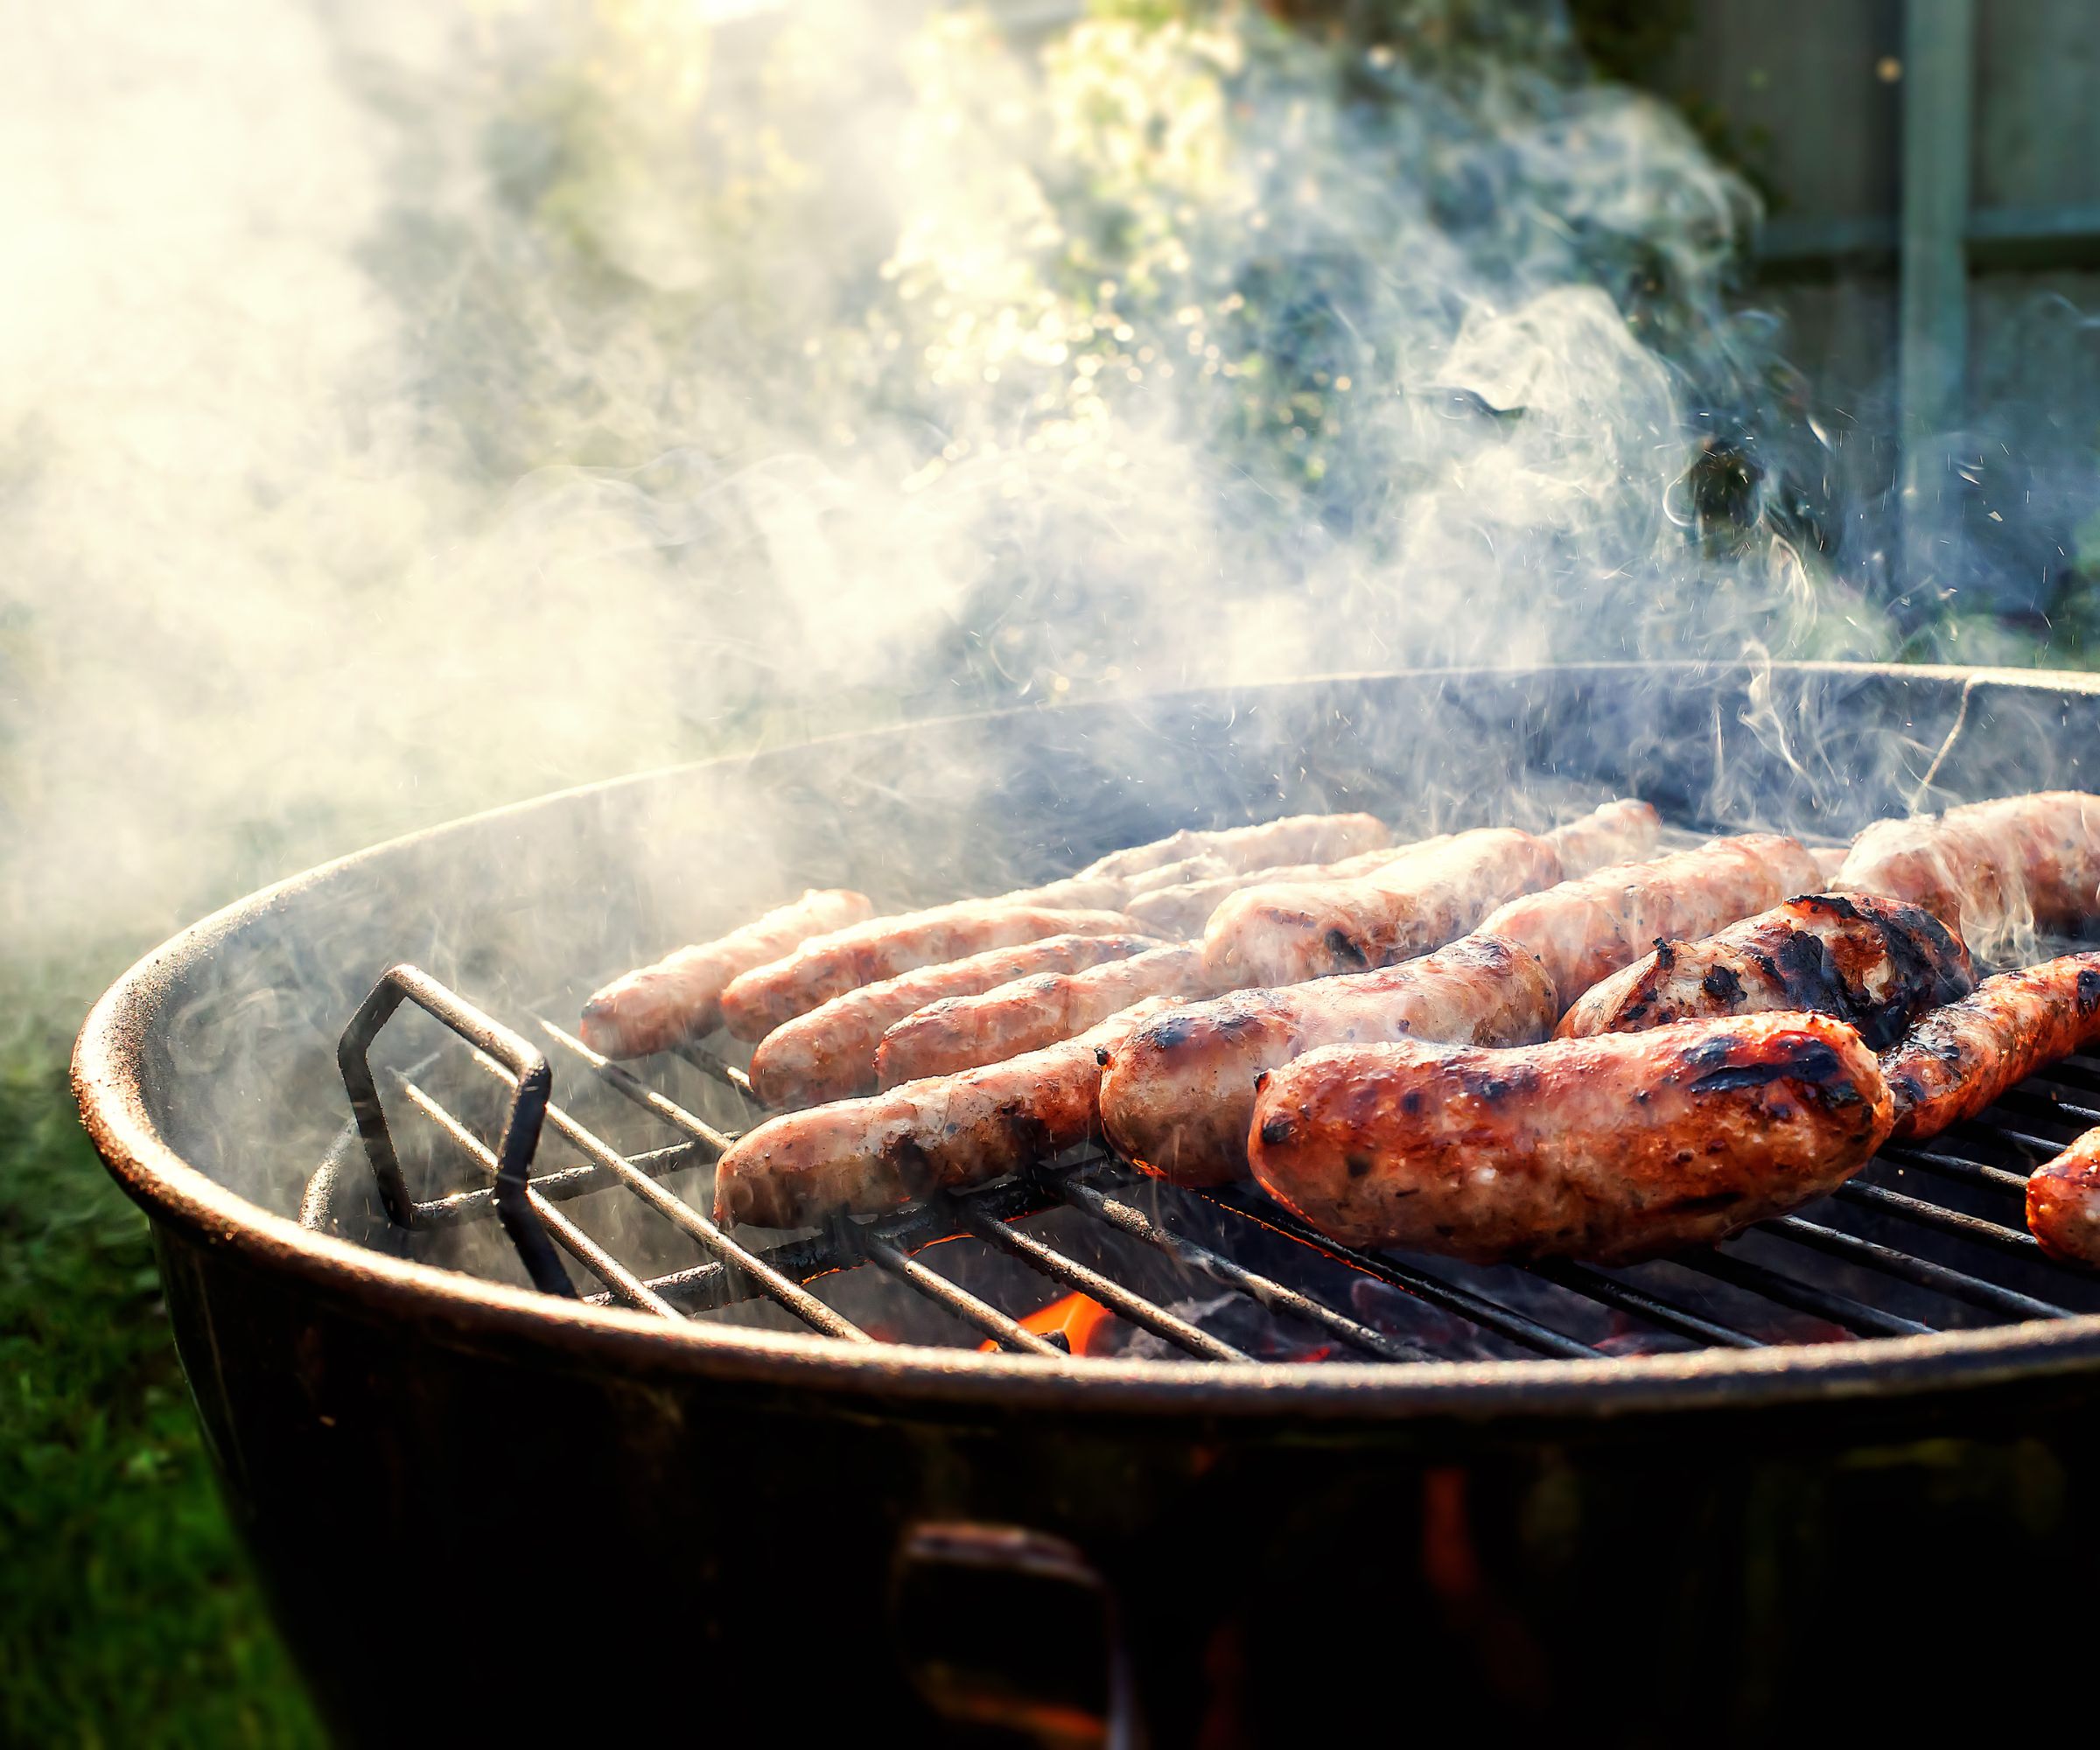 A close up of grilling sausages on a charcoal grill, with grill smoke